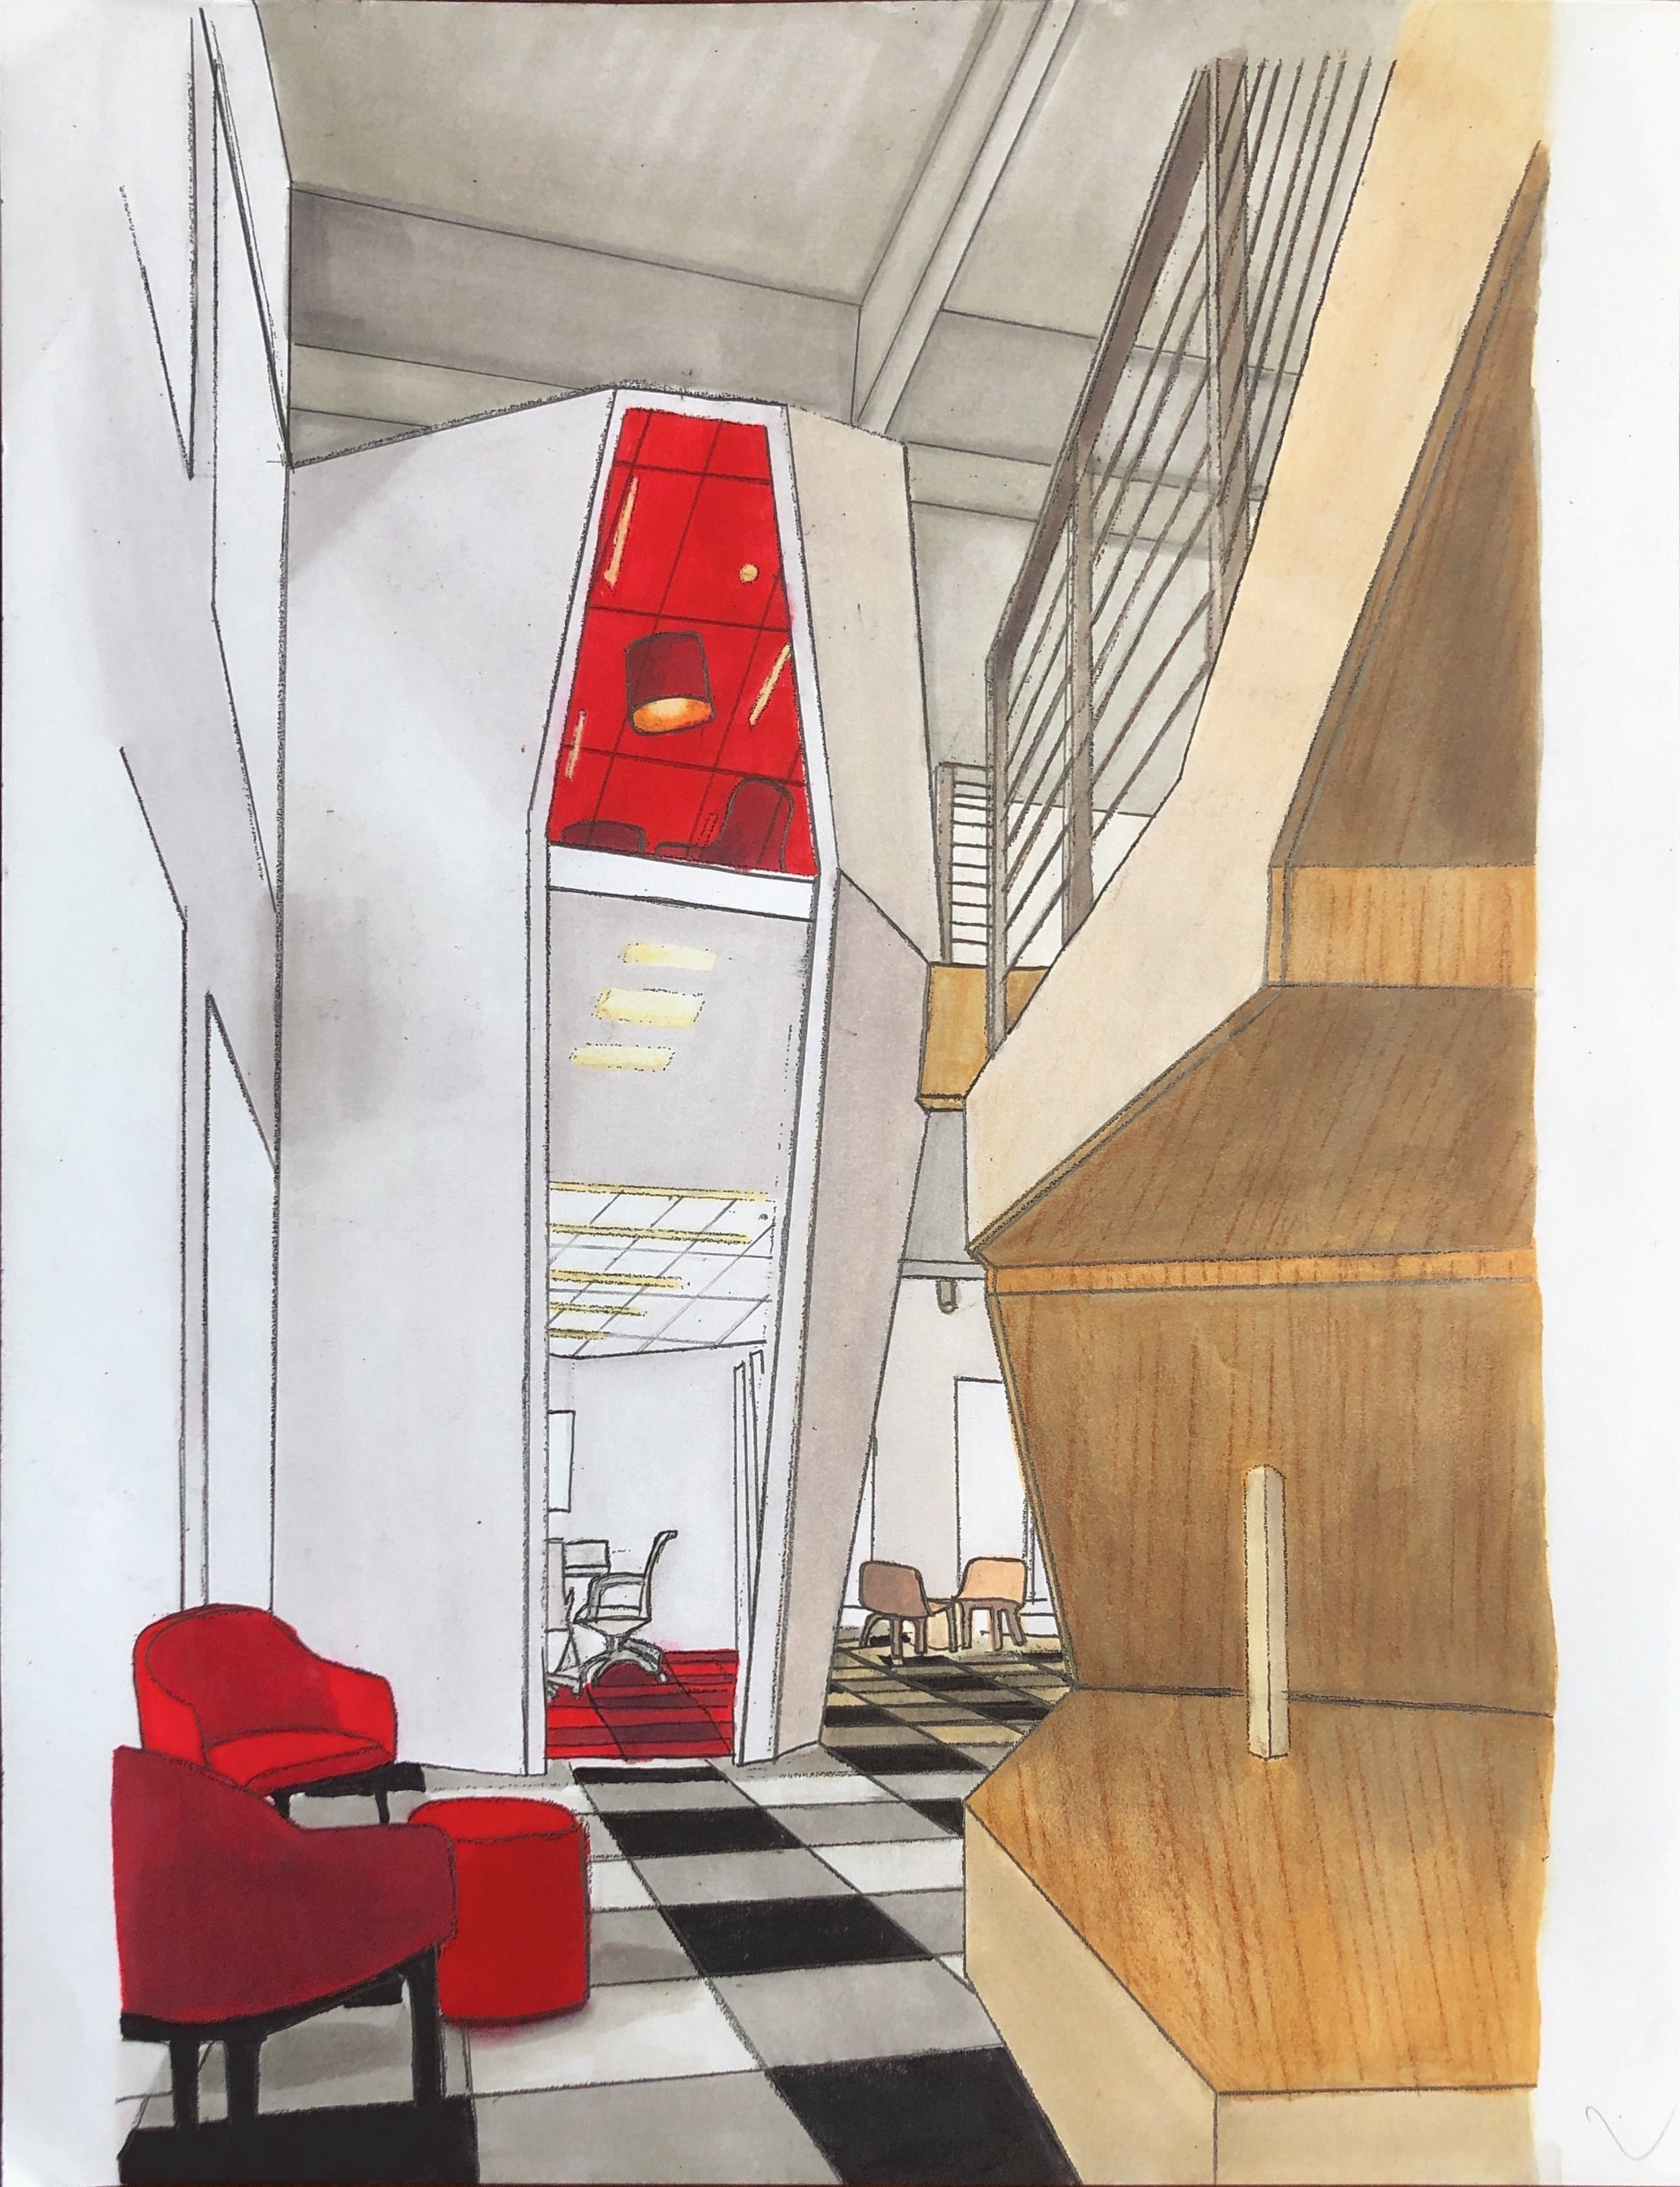 Hand rendered perspective of a waiting area with red chairs and large windows.